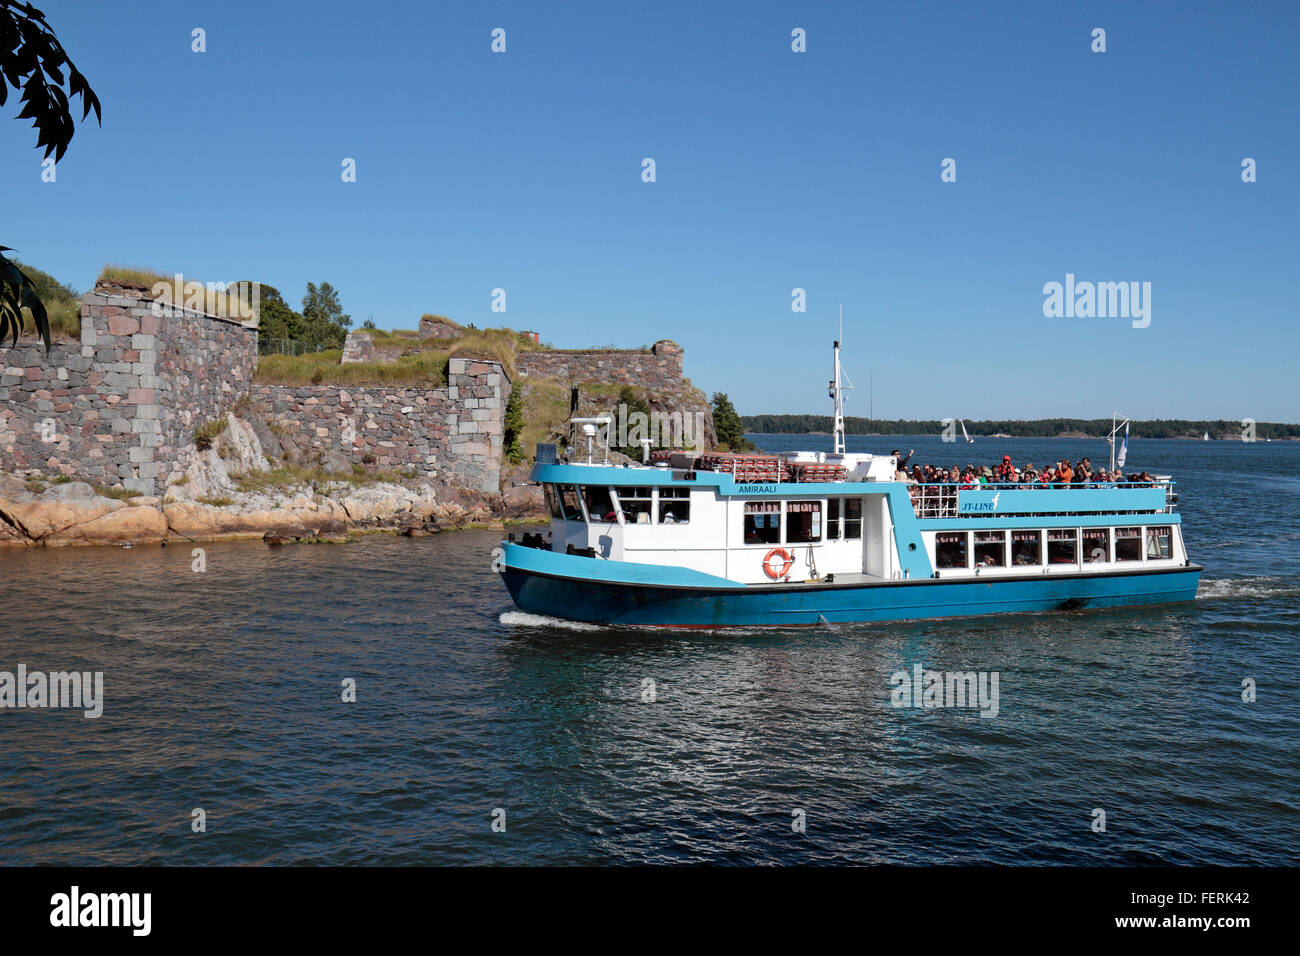 A JT-Line waterbus (between Kauppatori and Suomenlinna) on the fortress island of Suomenlinna, Helsinki, Finland. Stock Photo